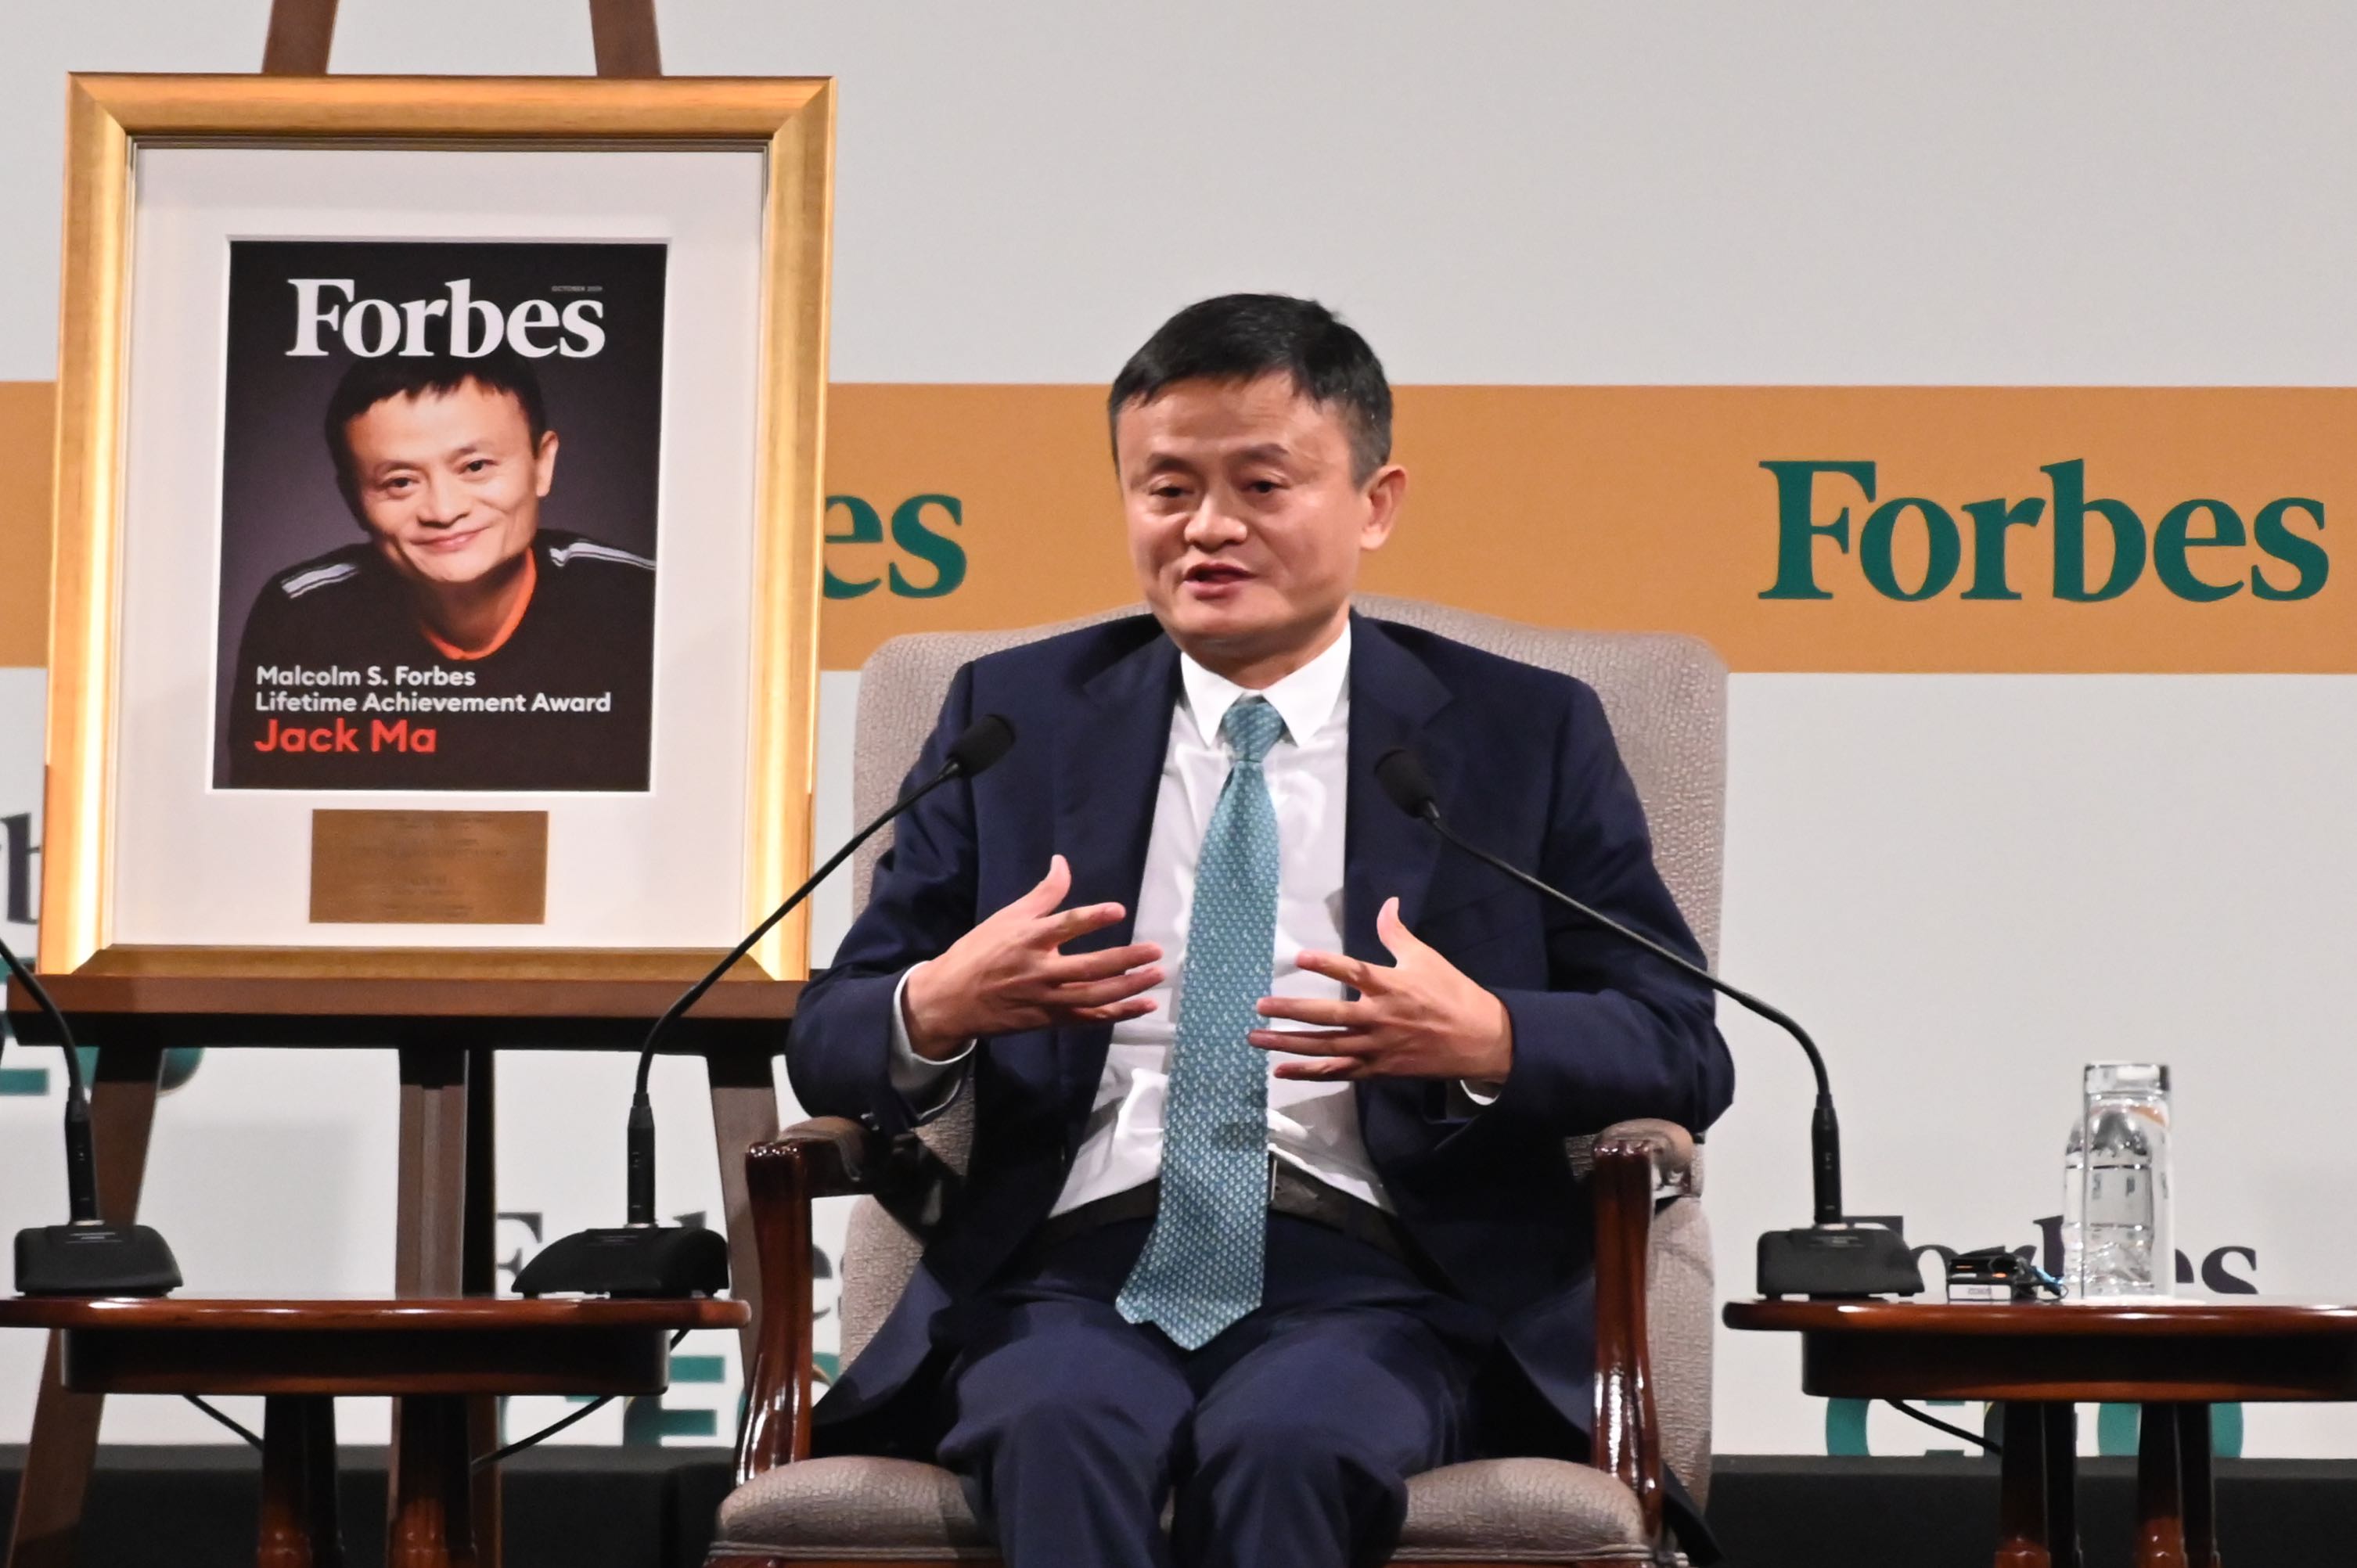 Jack Ma has been largely keeping a low profile and has made very few appearances in mainland China since Beijing came down heavily on his empire after he criticised China’s regulatory policies